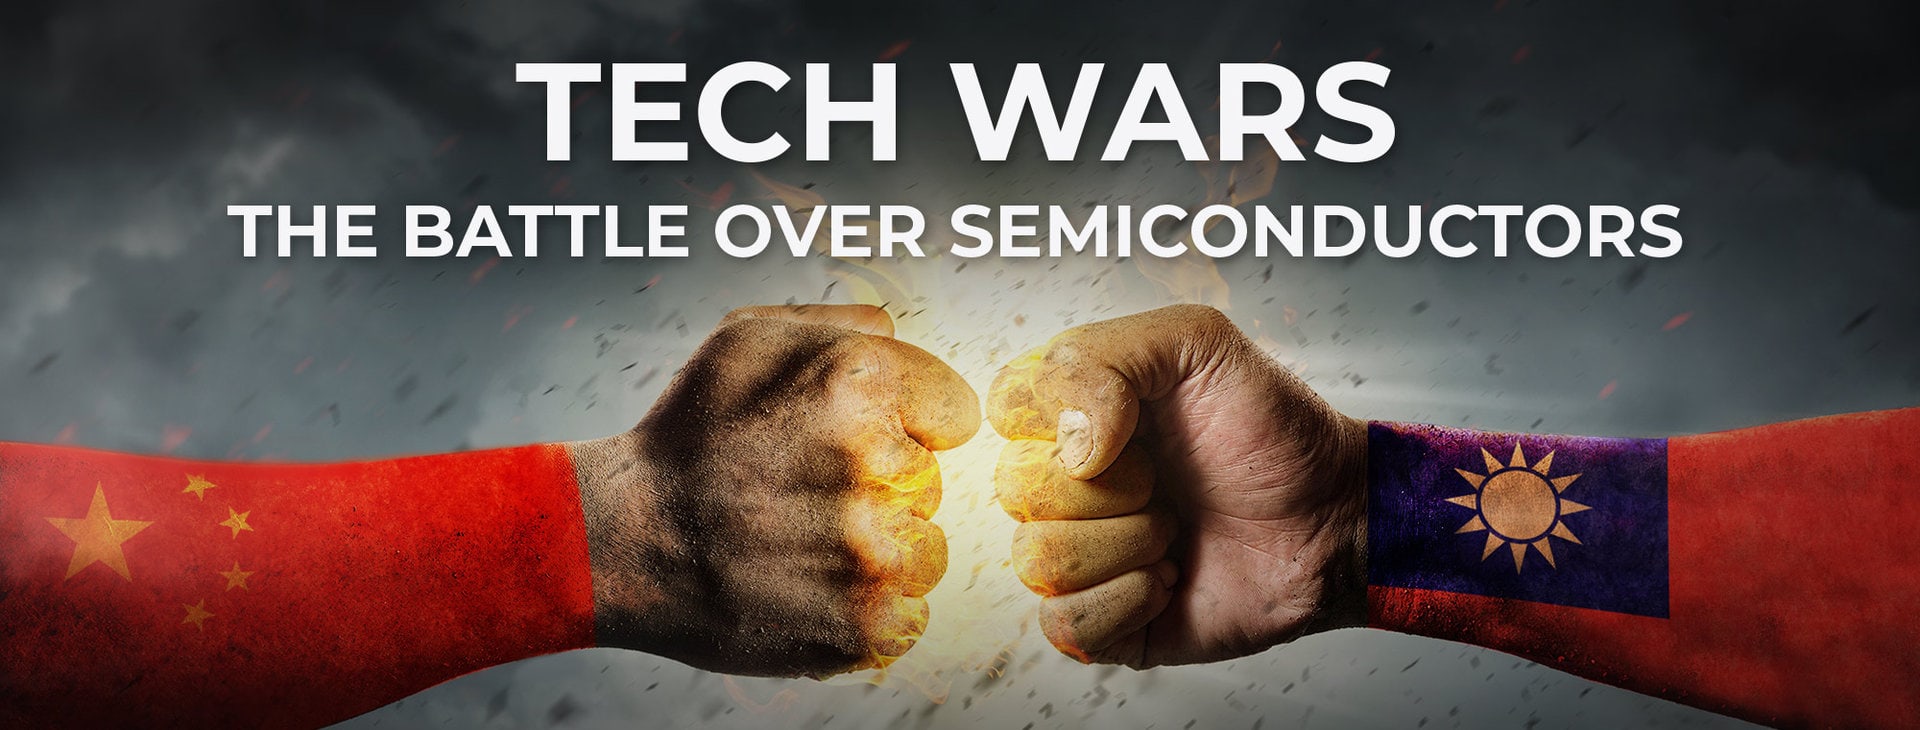 Tech Wars: The Battle Over Semiconductors